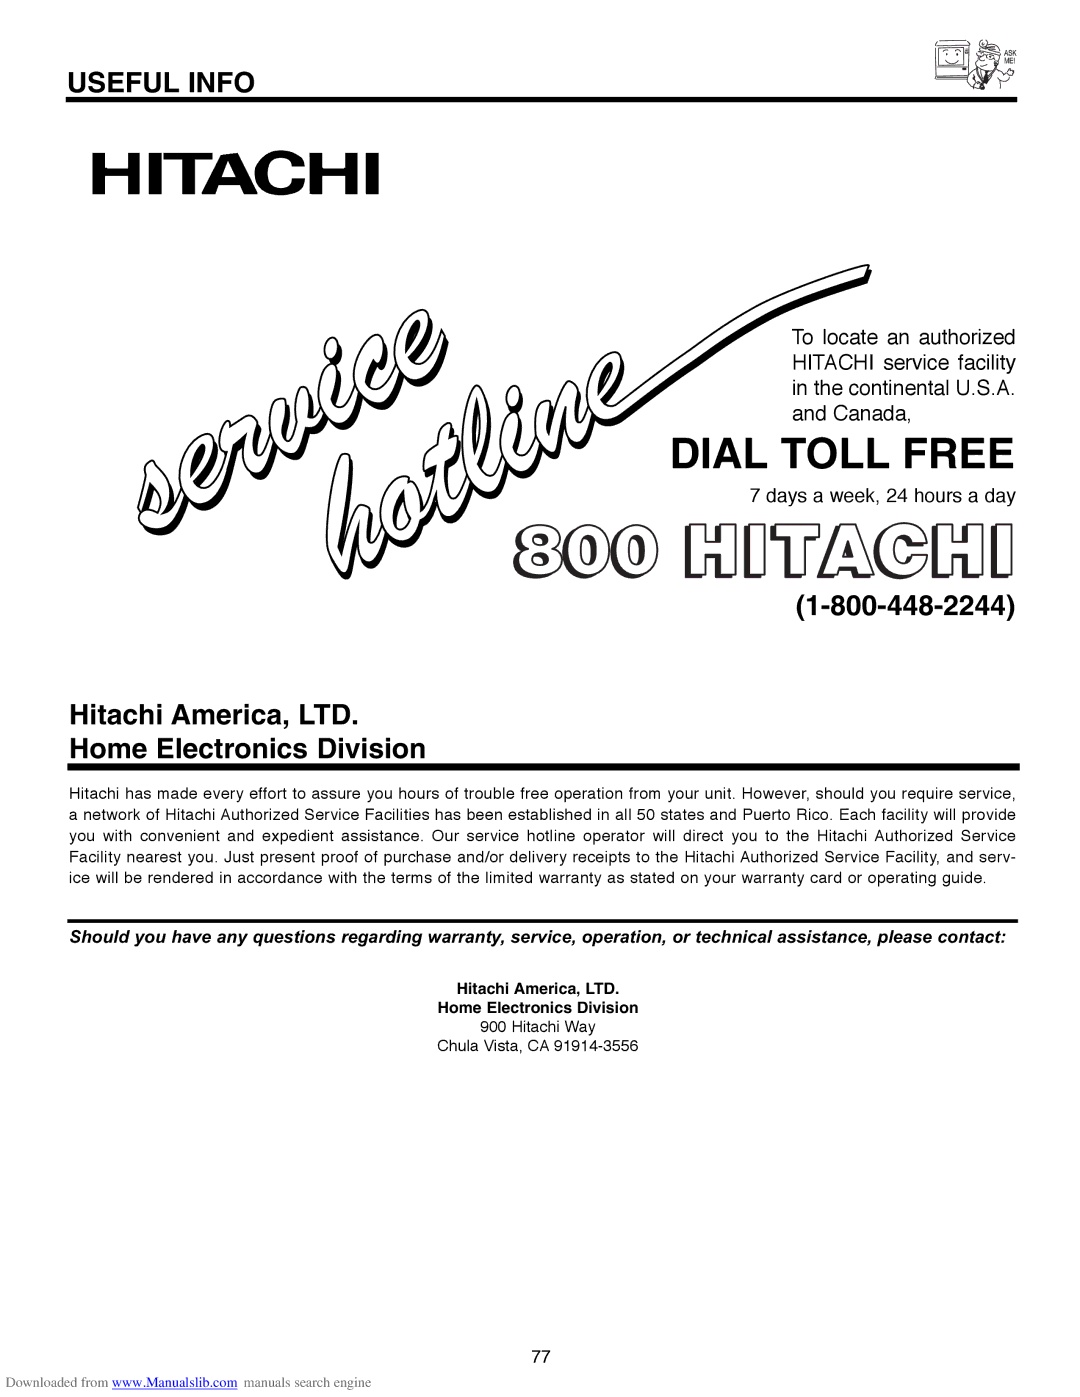 Hitachi 50V500A, 50V500G, 50V500E, 60V500E, 60V500A important safety instructions Dial Toll Free, Home Electronics Division 